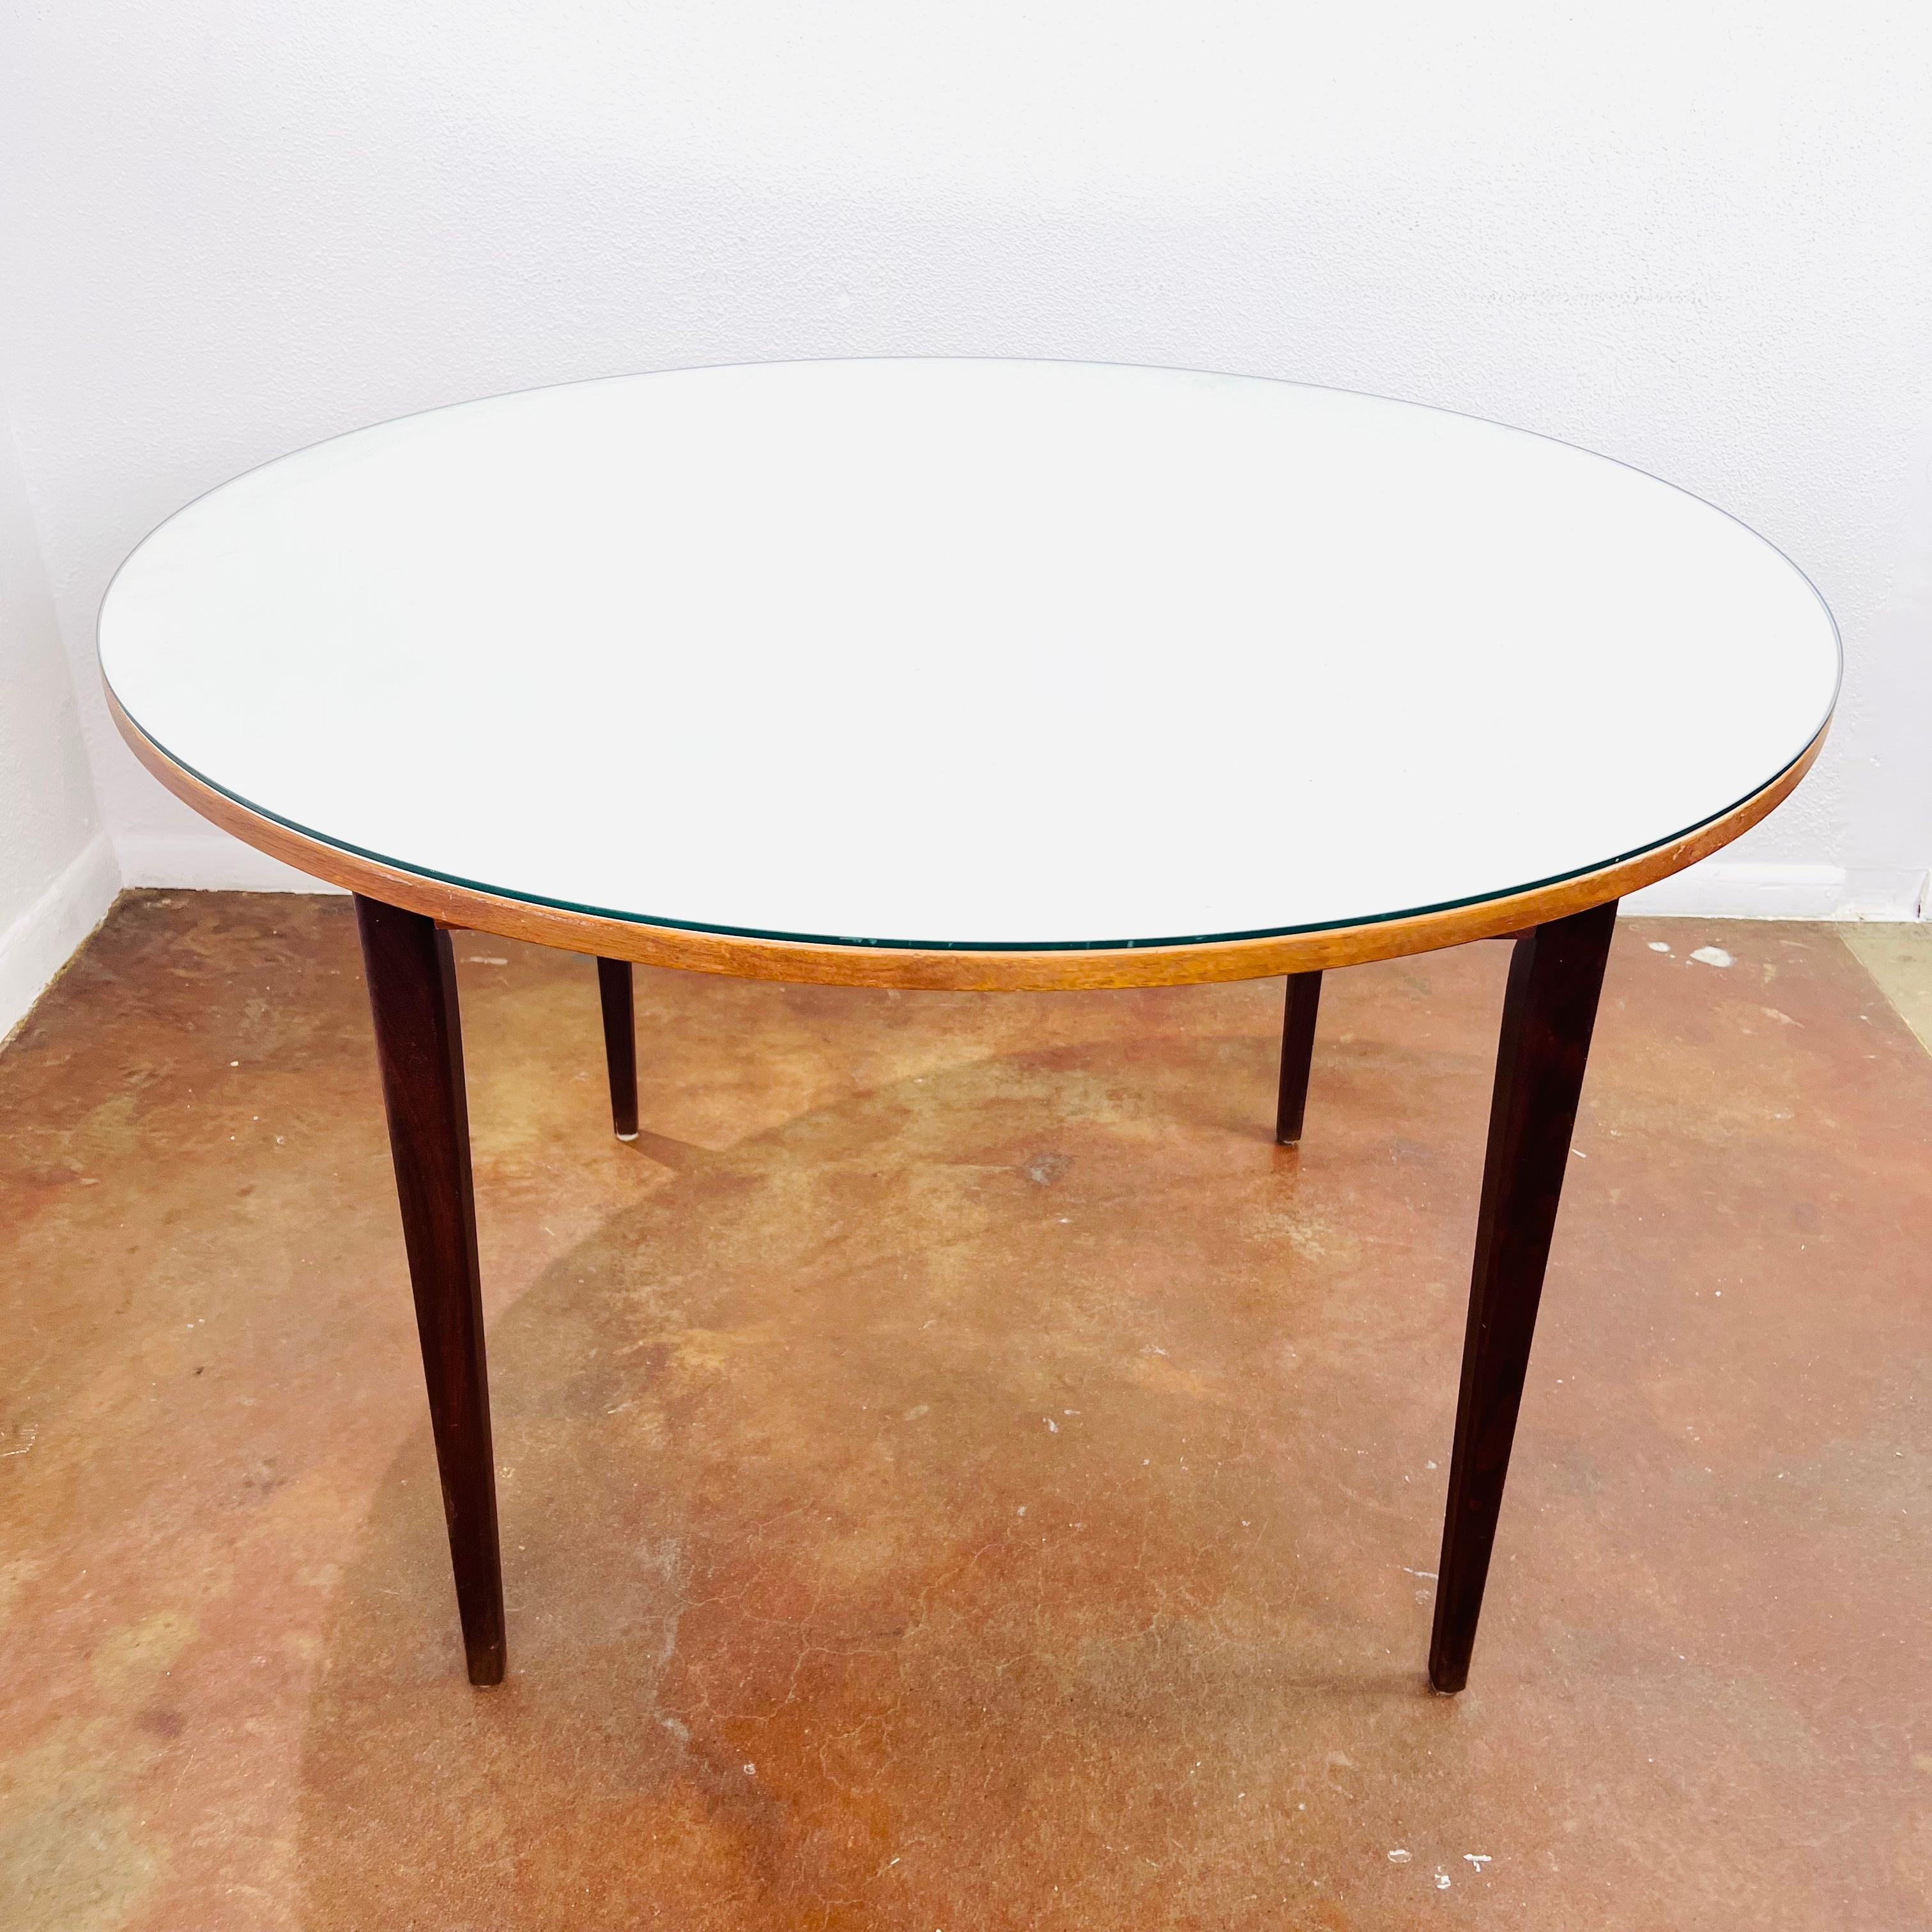 Vintage round dining table with white formica and round glass top. Great compact size for any dining or kitchen space. Some dings/scratches/wear on wood due to normal age and use. Good structrual condition.